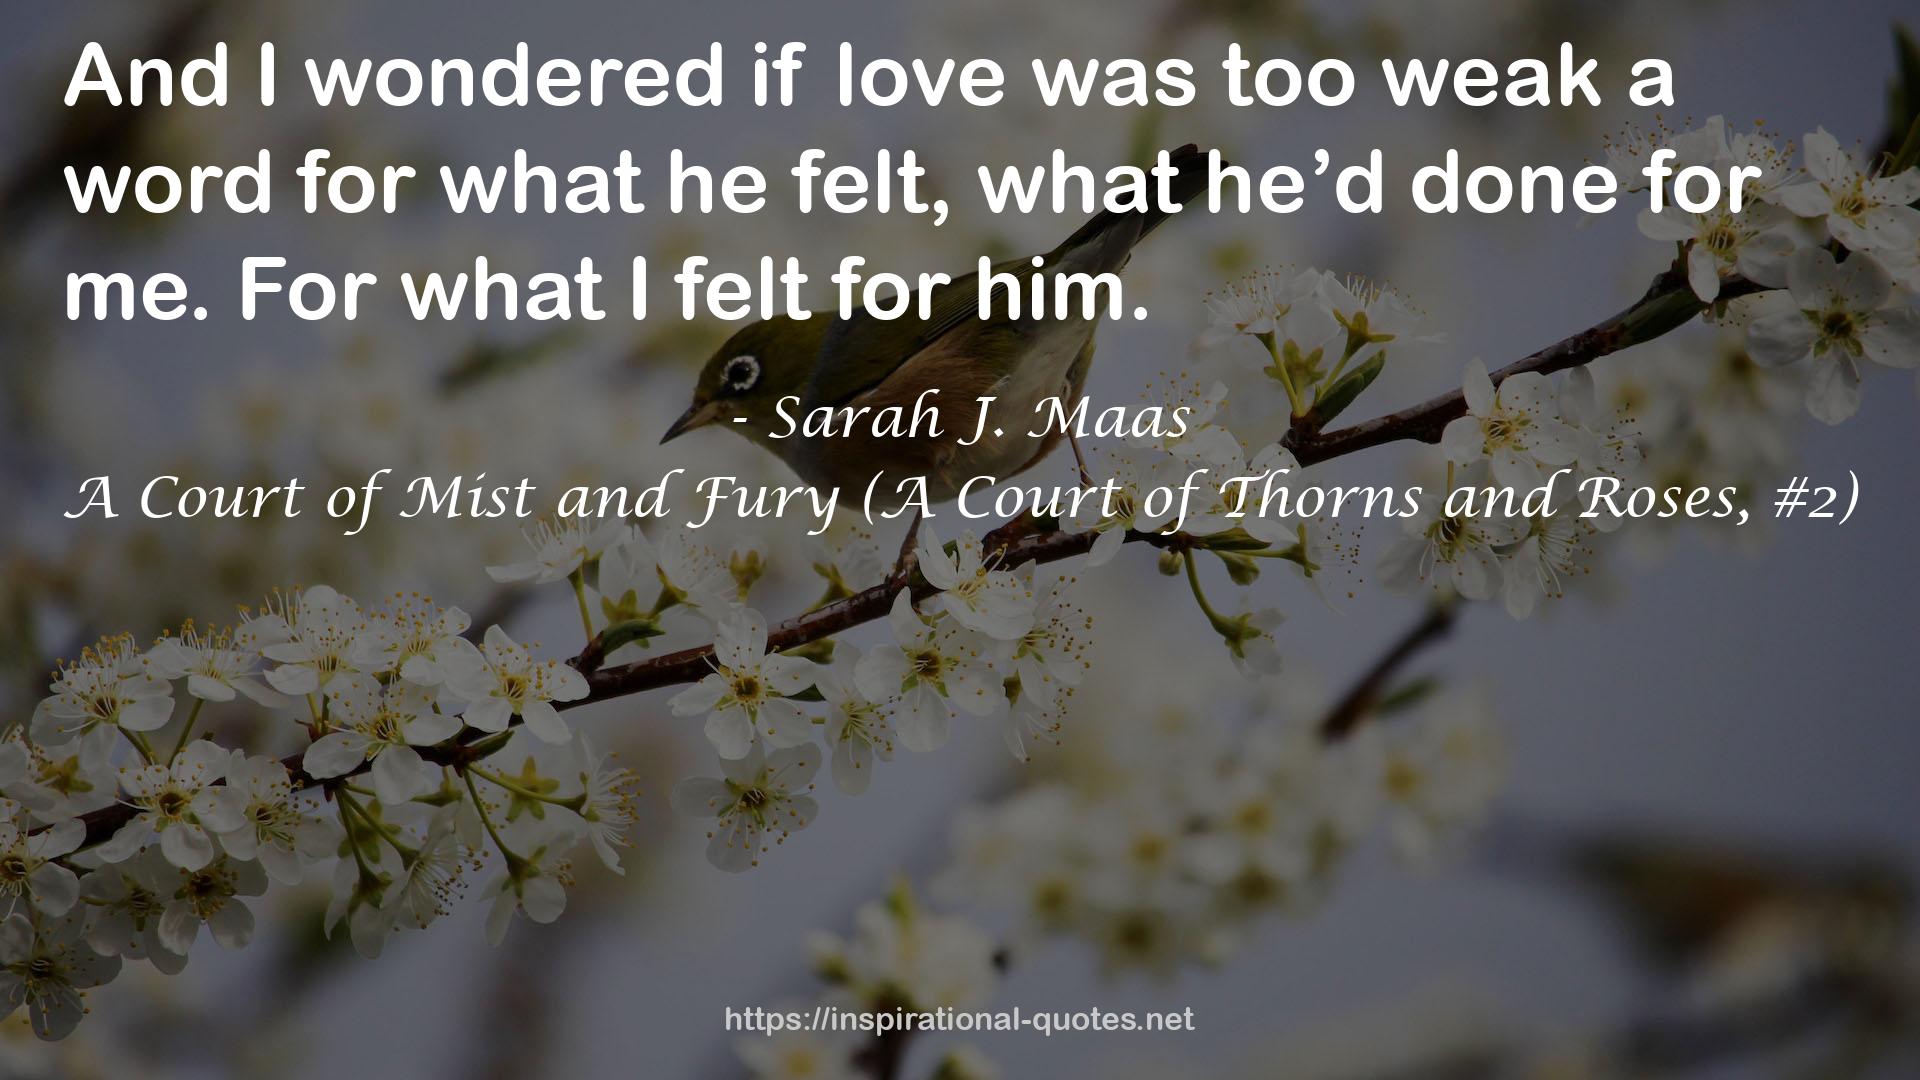 A Court of Mist and Fury (A Court of Thorns and Roses, #2) QUOTES